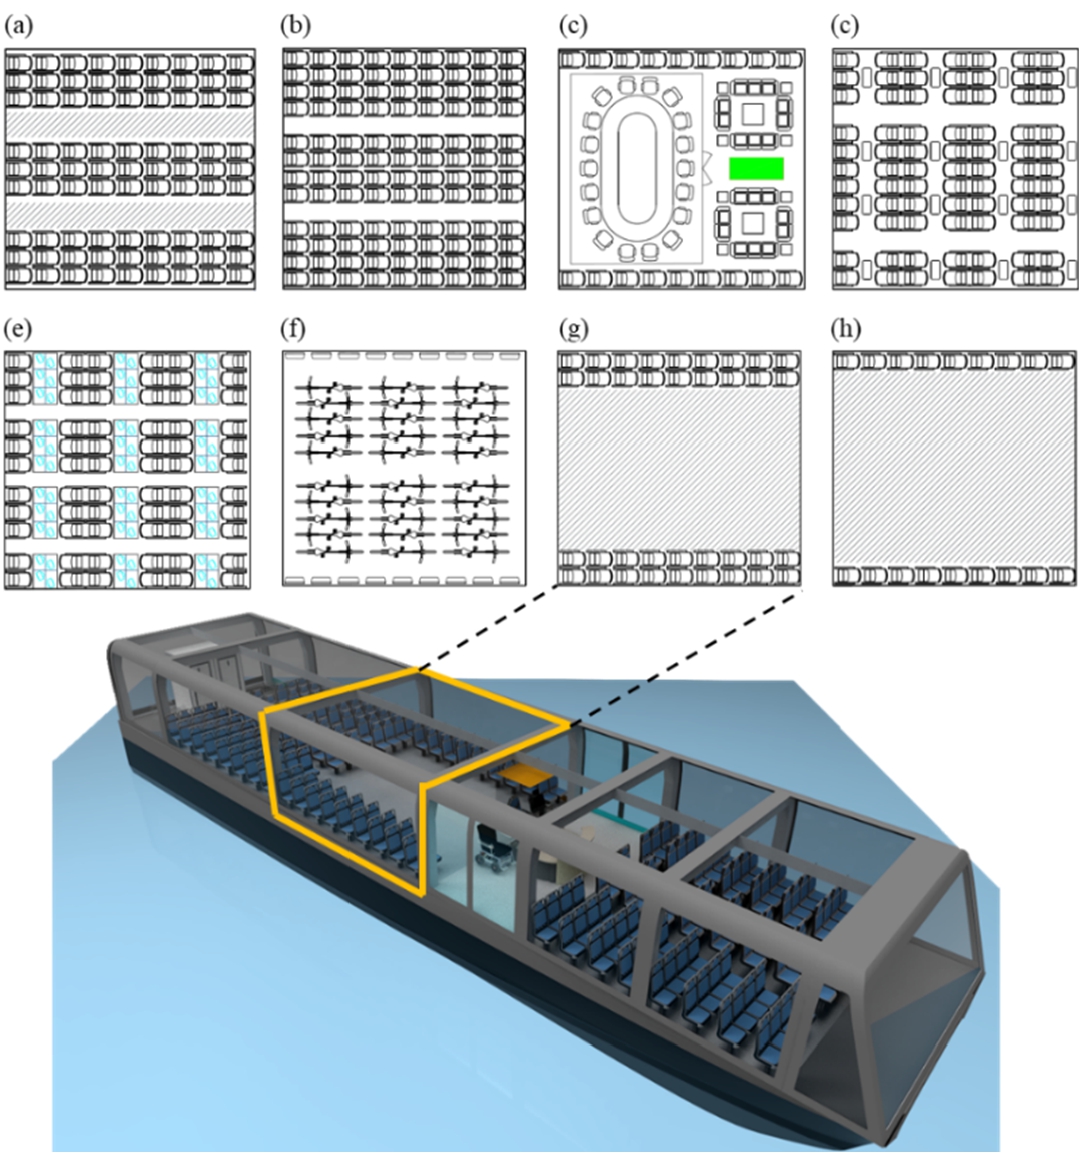 Functional variants of sub-module type Z. (a), (b), (d) represent seating layouts as observed in City and suburban route ferries. (f), (g), (h) represent layouts for standing passengers and bicycles typically seen on Bridge route ferries. (c) and (e) are new ideas representing a transformable conference room and an on-board workstation.